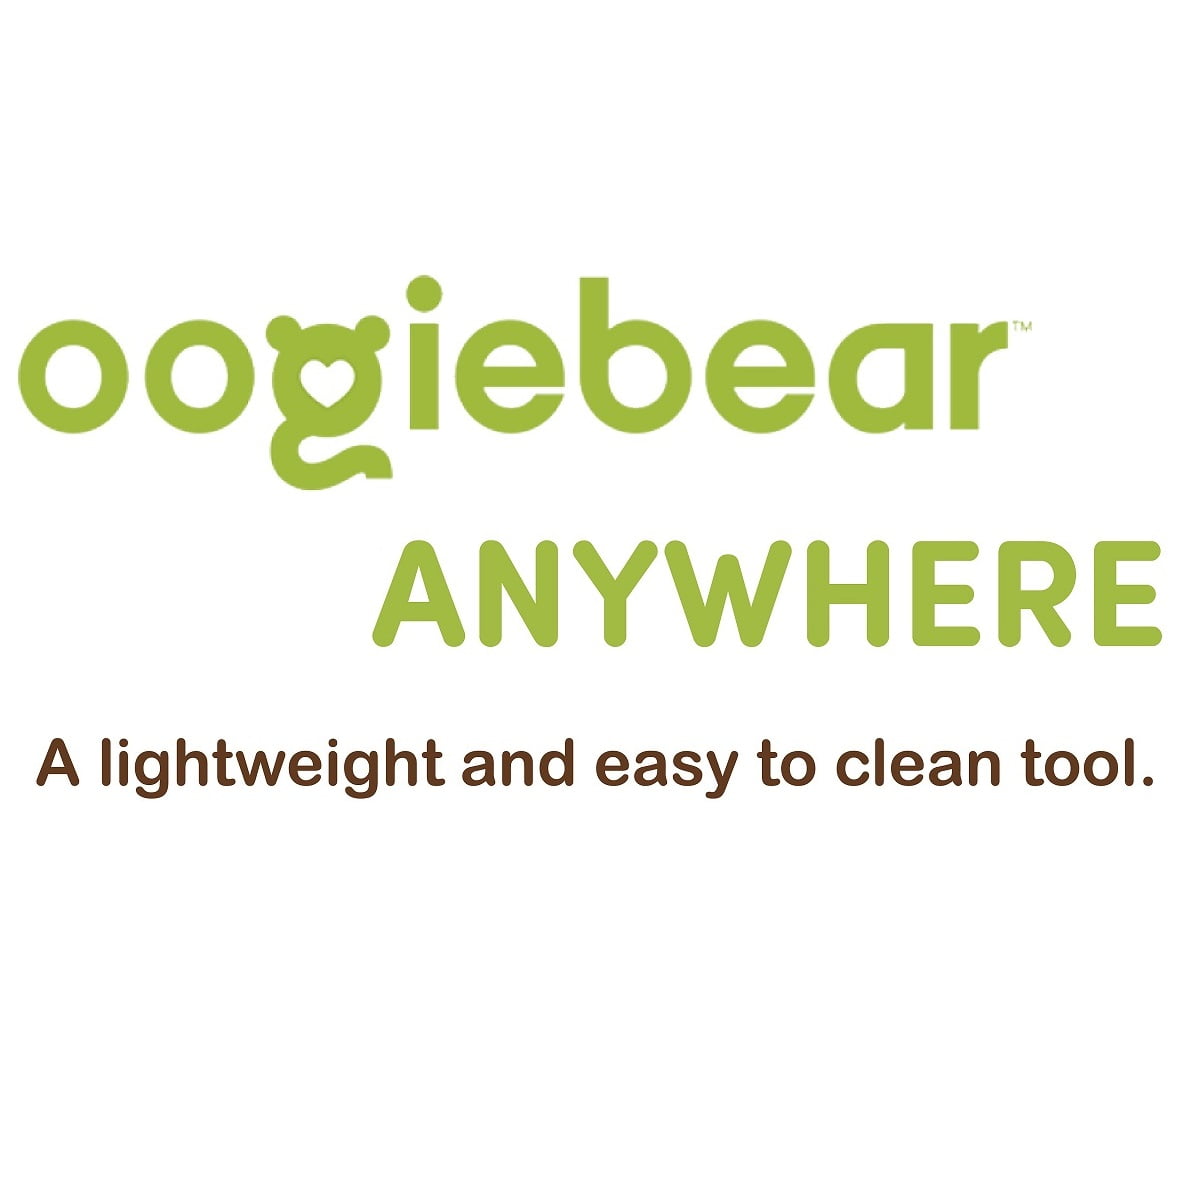 oogiebear - Nose and Ear Gadget. Safe, Easy Nasal Booger and Ear Wax  Remover for Newborns, Infants and Toddlers. Dual Earwax and Snot Remover -  with